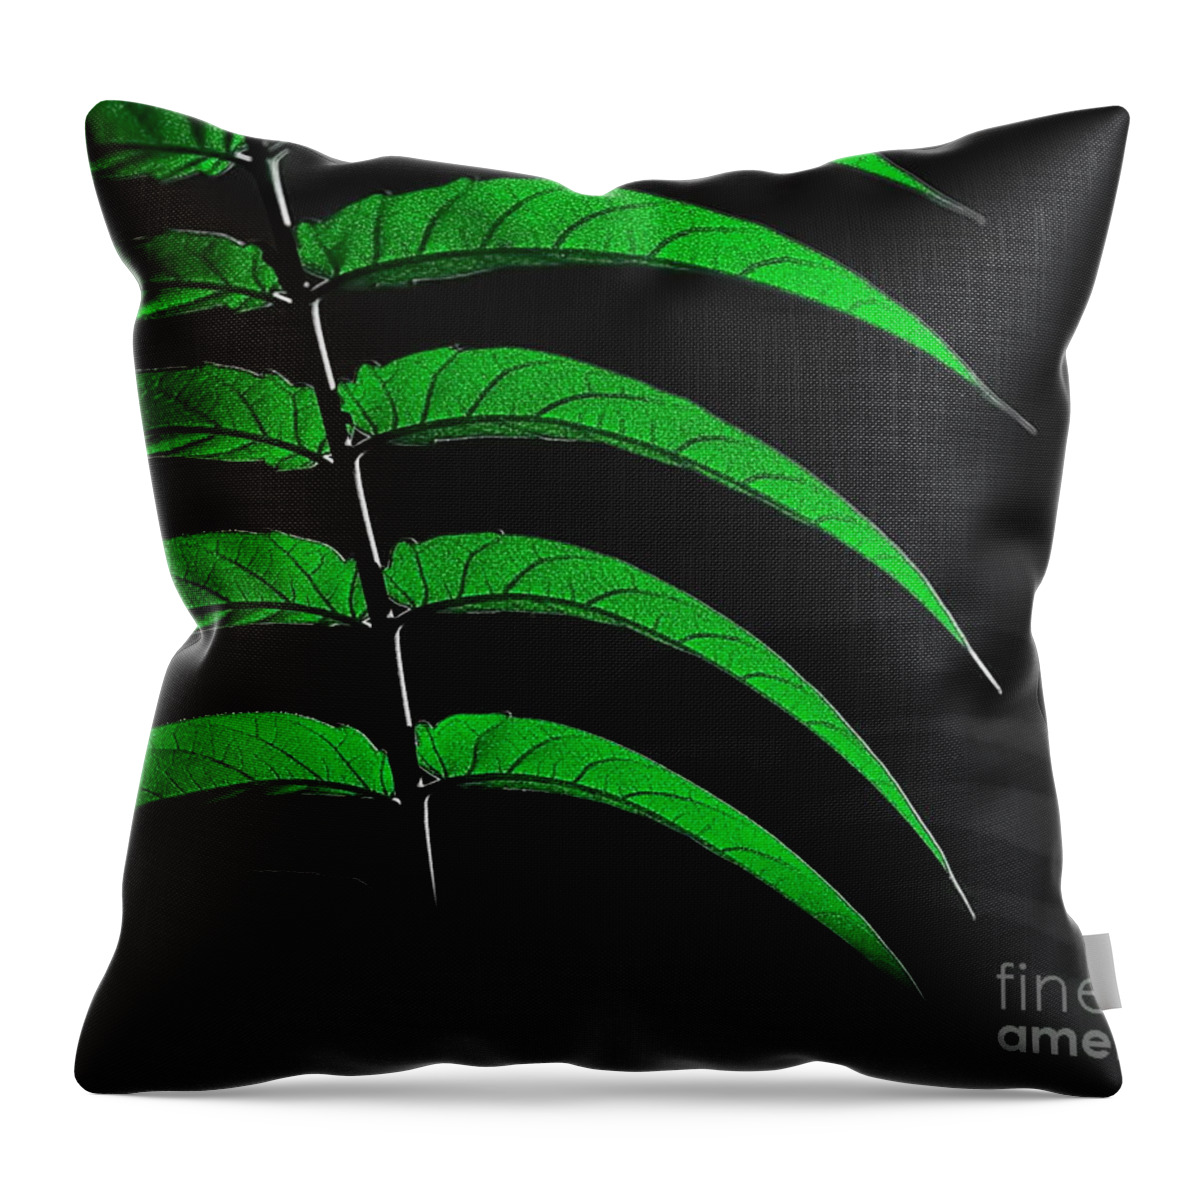 Digital Color Photo Throw Pillow featuring the digital art Backyard Abstract by Tim Richards